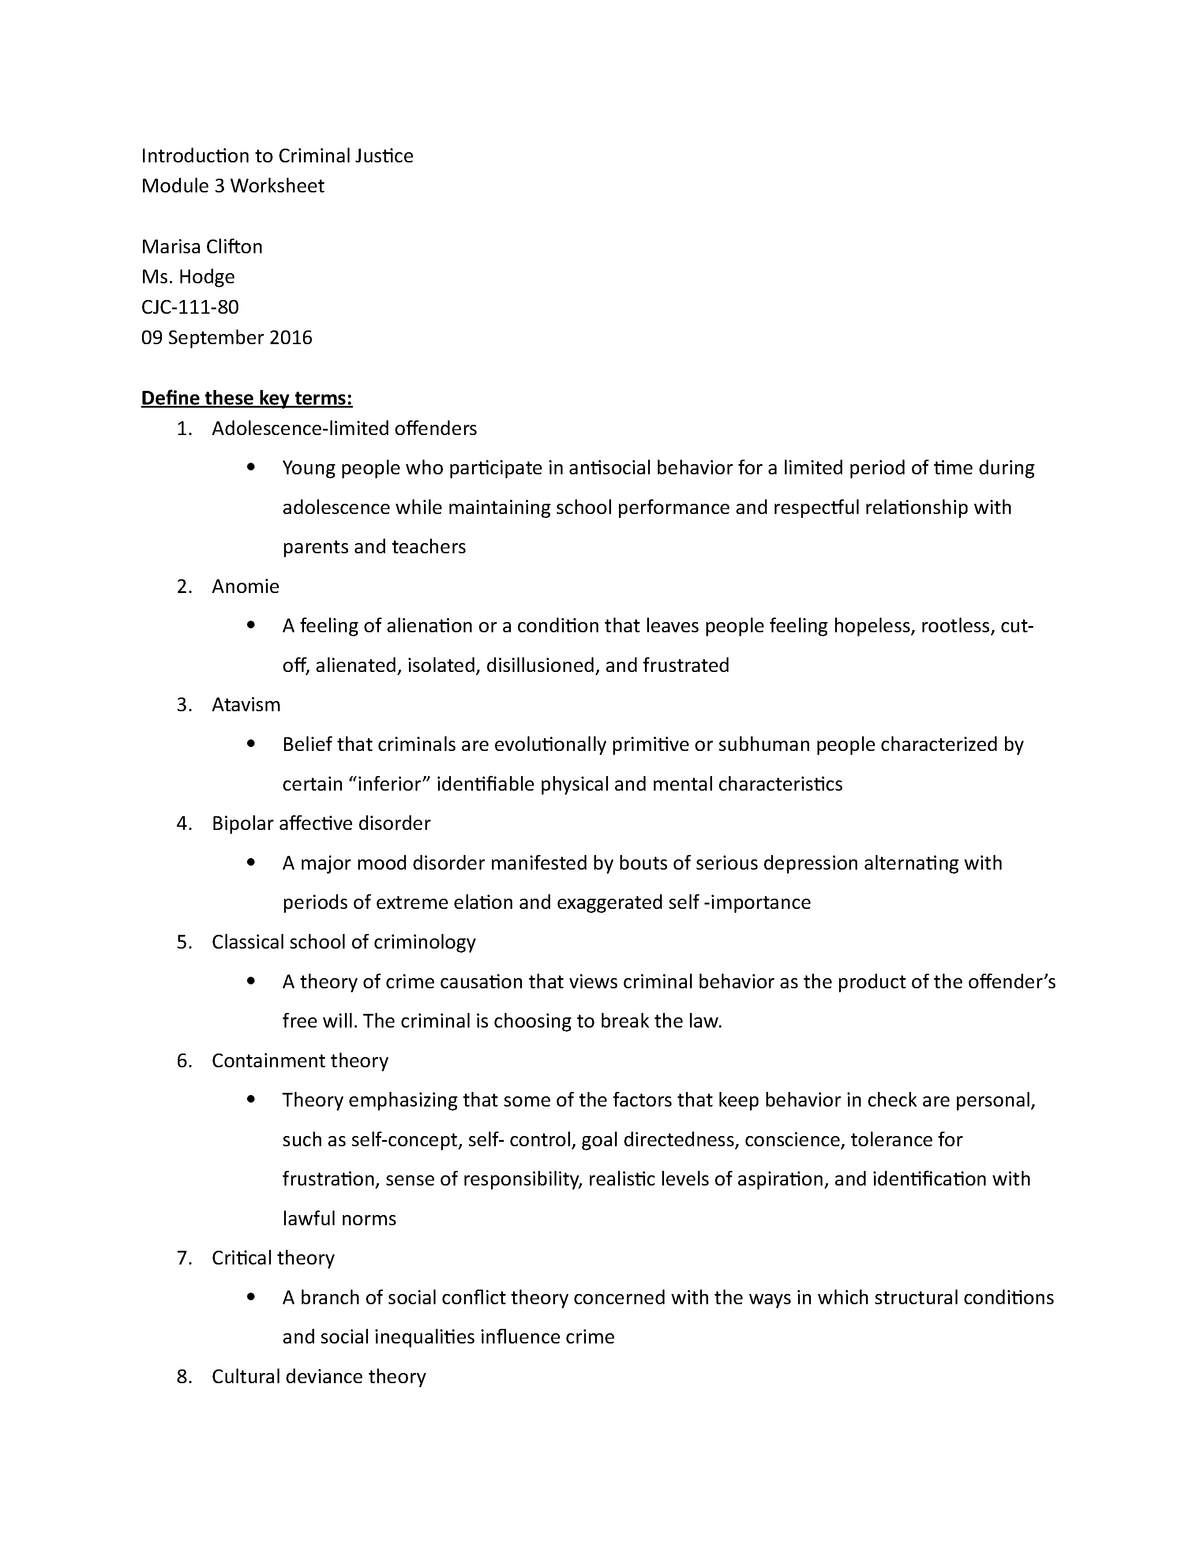 Chapter 3 worksheet - Introduction to Criminal Justice Module 3 ...